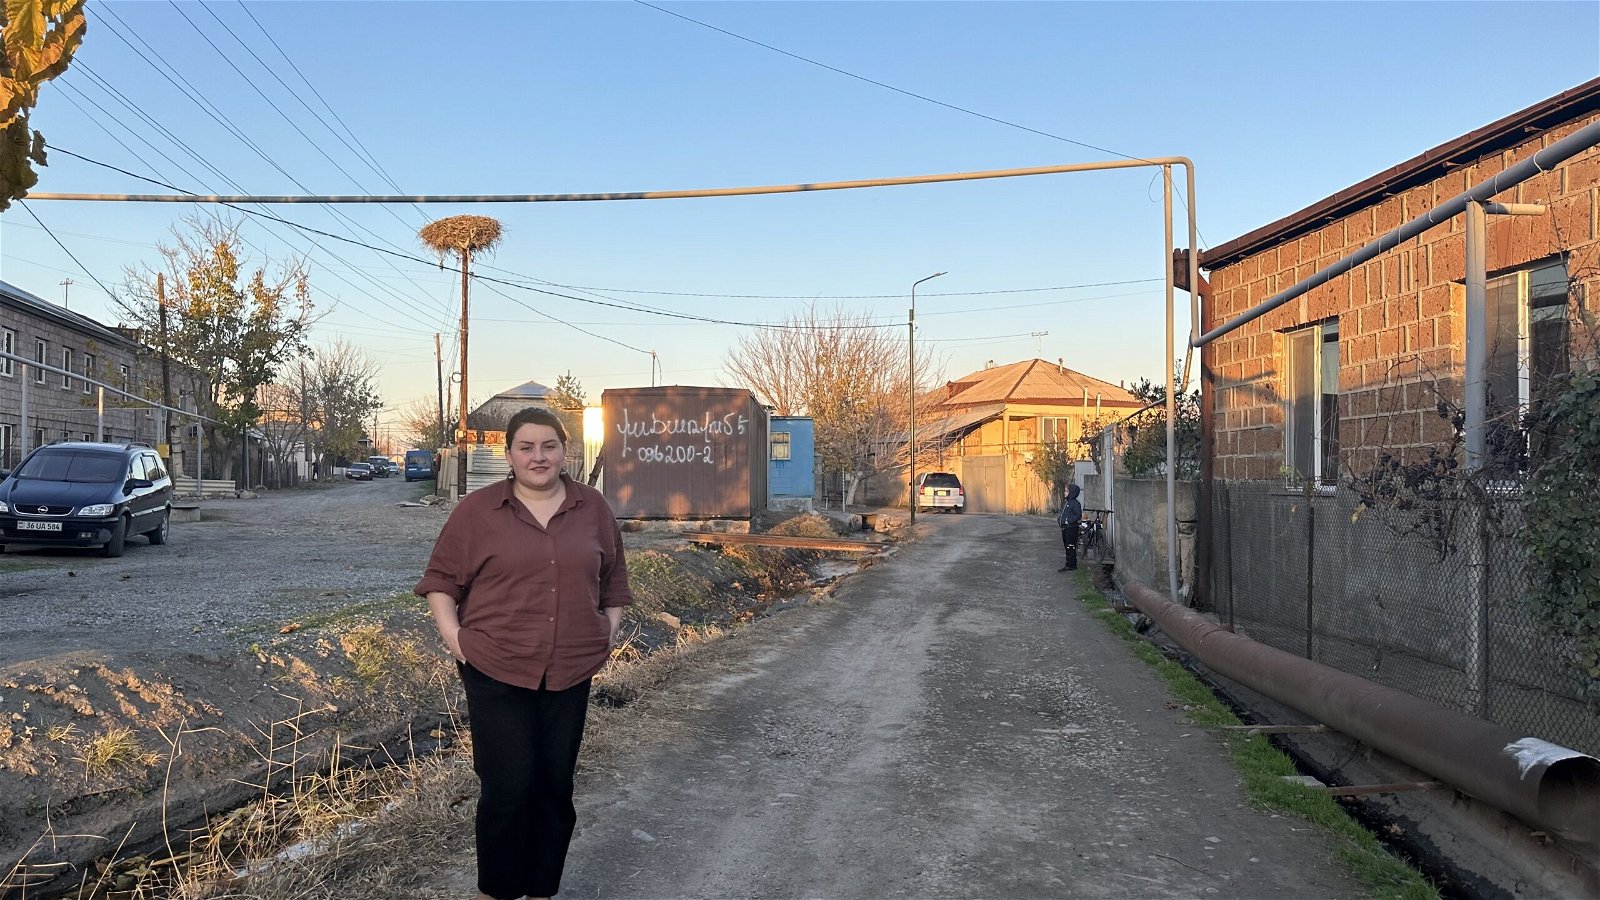 https://armenianweekly.b-cdn.net/wp-content/uploads/2024/01/Lilit-Sargsyan-in-front-of-the-makeshift-house-or-domik-which-she-bought-with-the-help-of-friends-and-will-become-her-new-house-scaled.jpeg